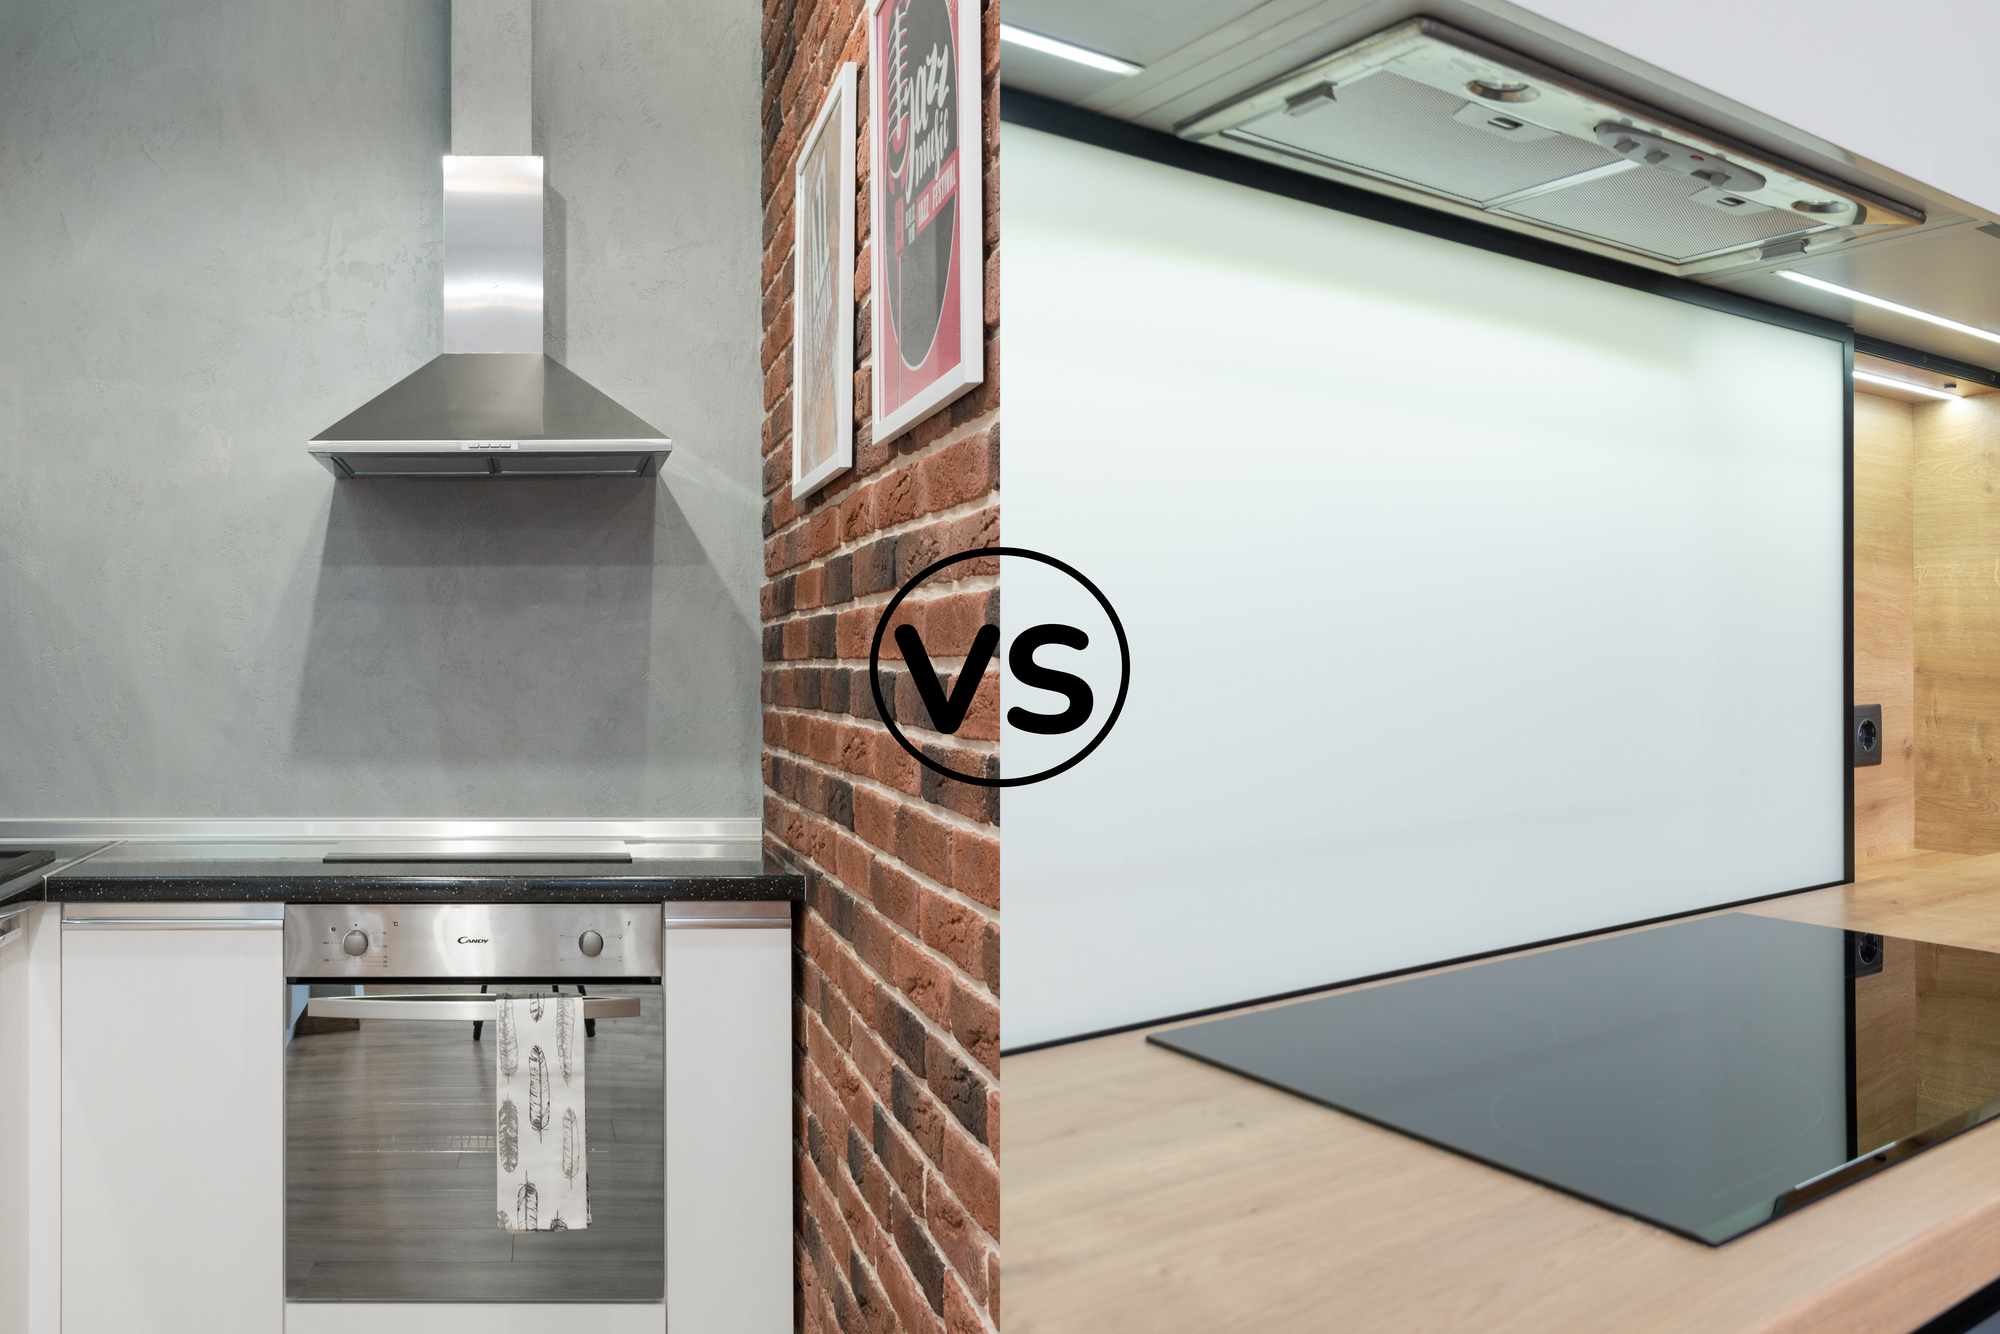 Ducted vs. Ductless Range Hood: Which One to Buy?